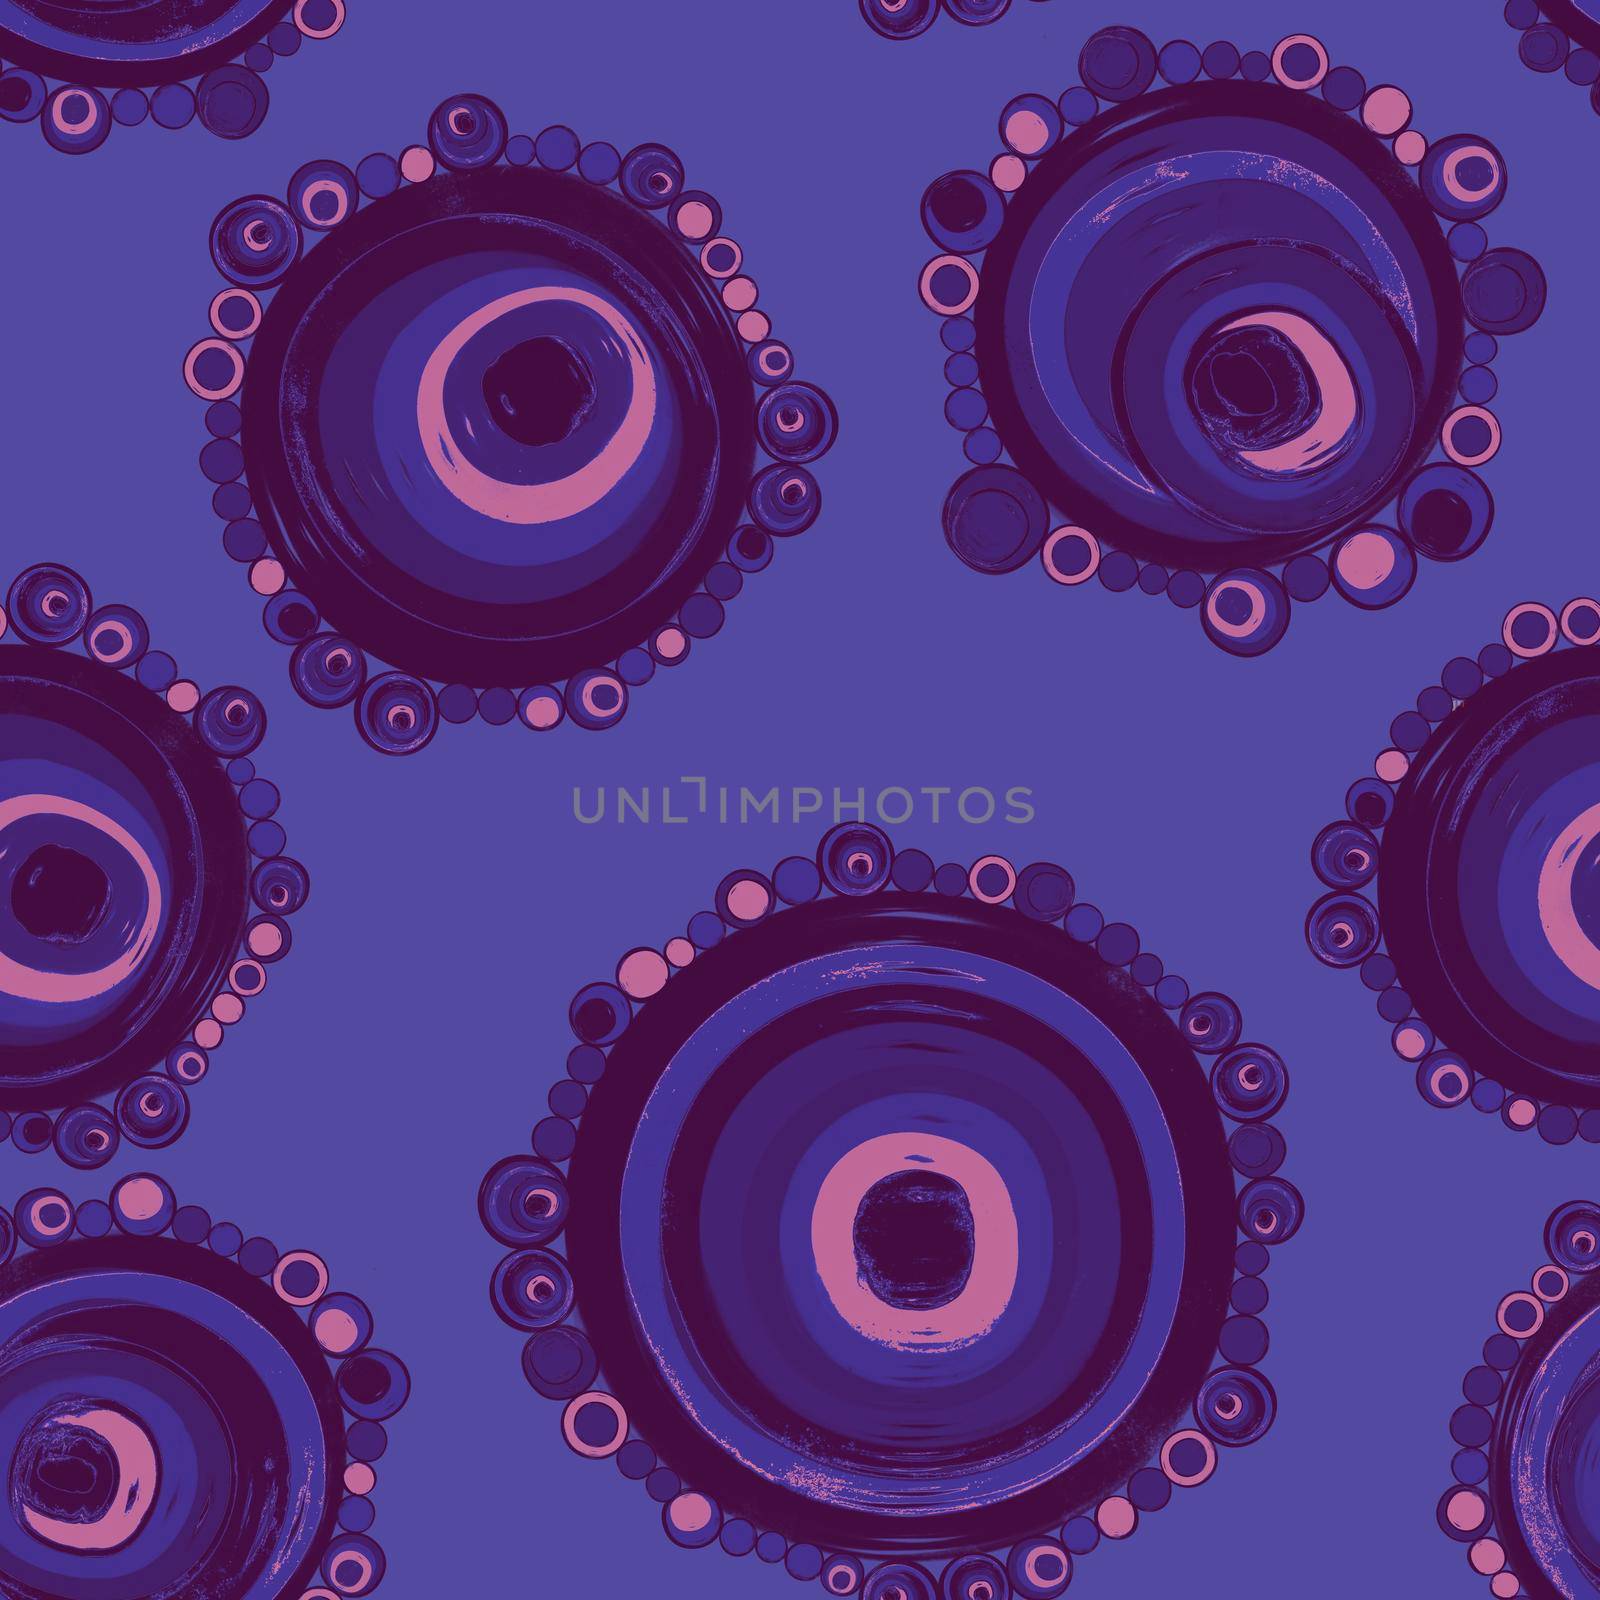 Geometric seamless pattern,texture with perfectly contacting nested circles with different size colors.Repeating pattern with circles filled with dots.Purple on lilac.For textile,wrapping paper,banner